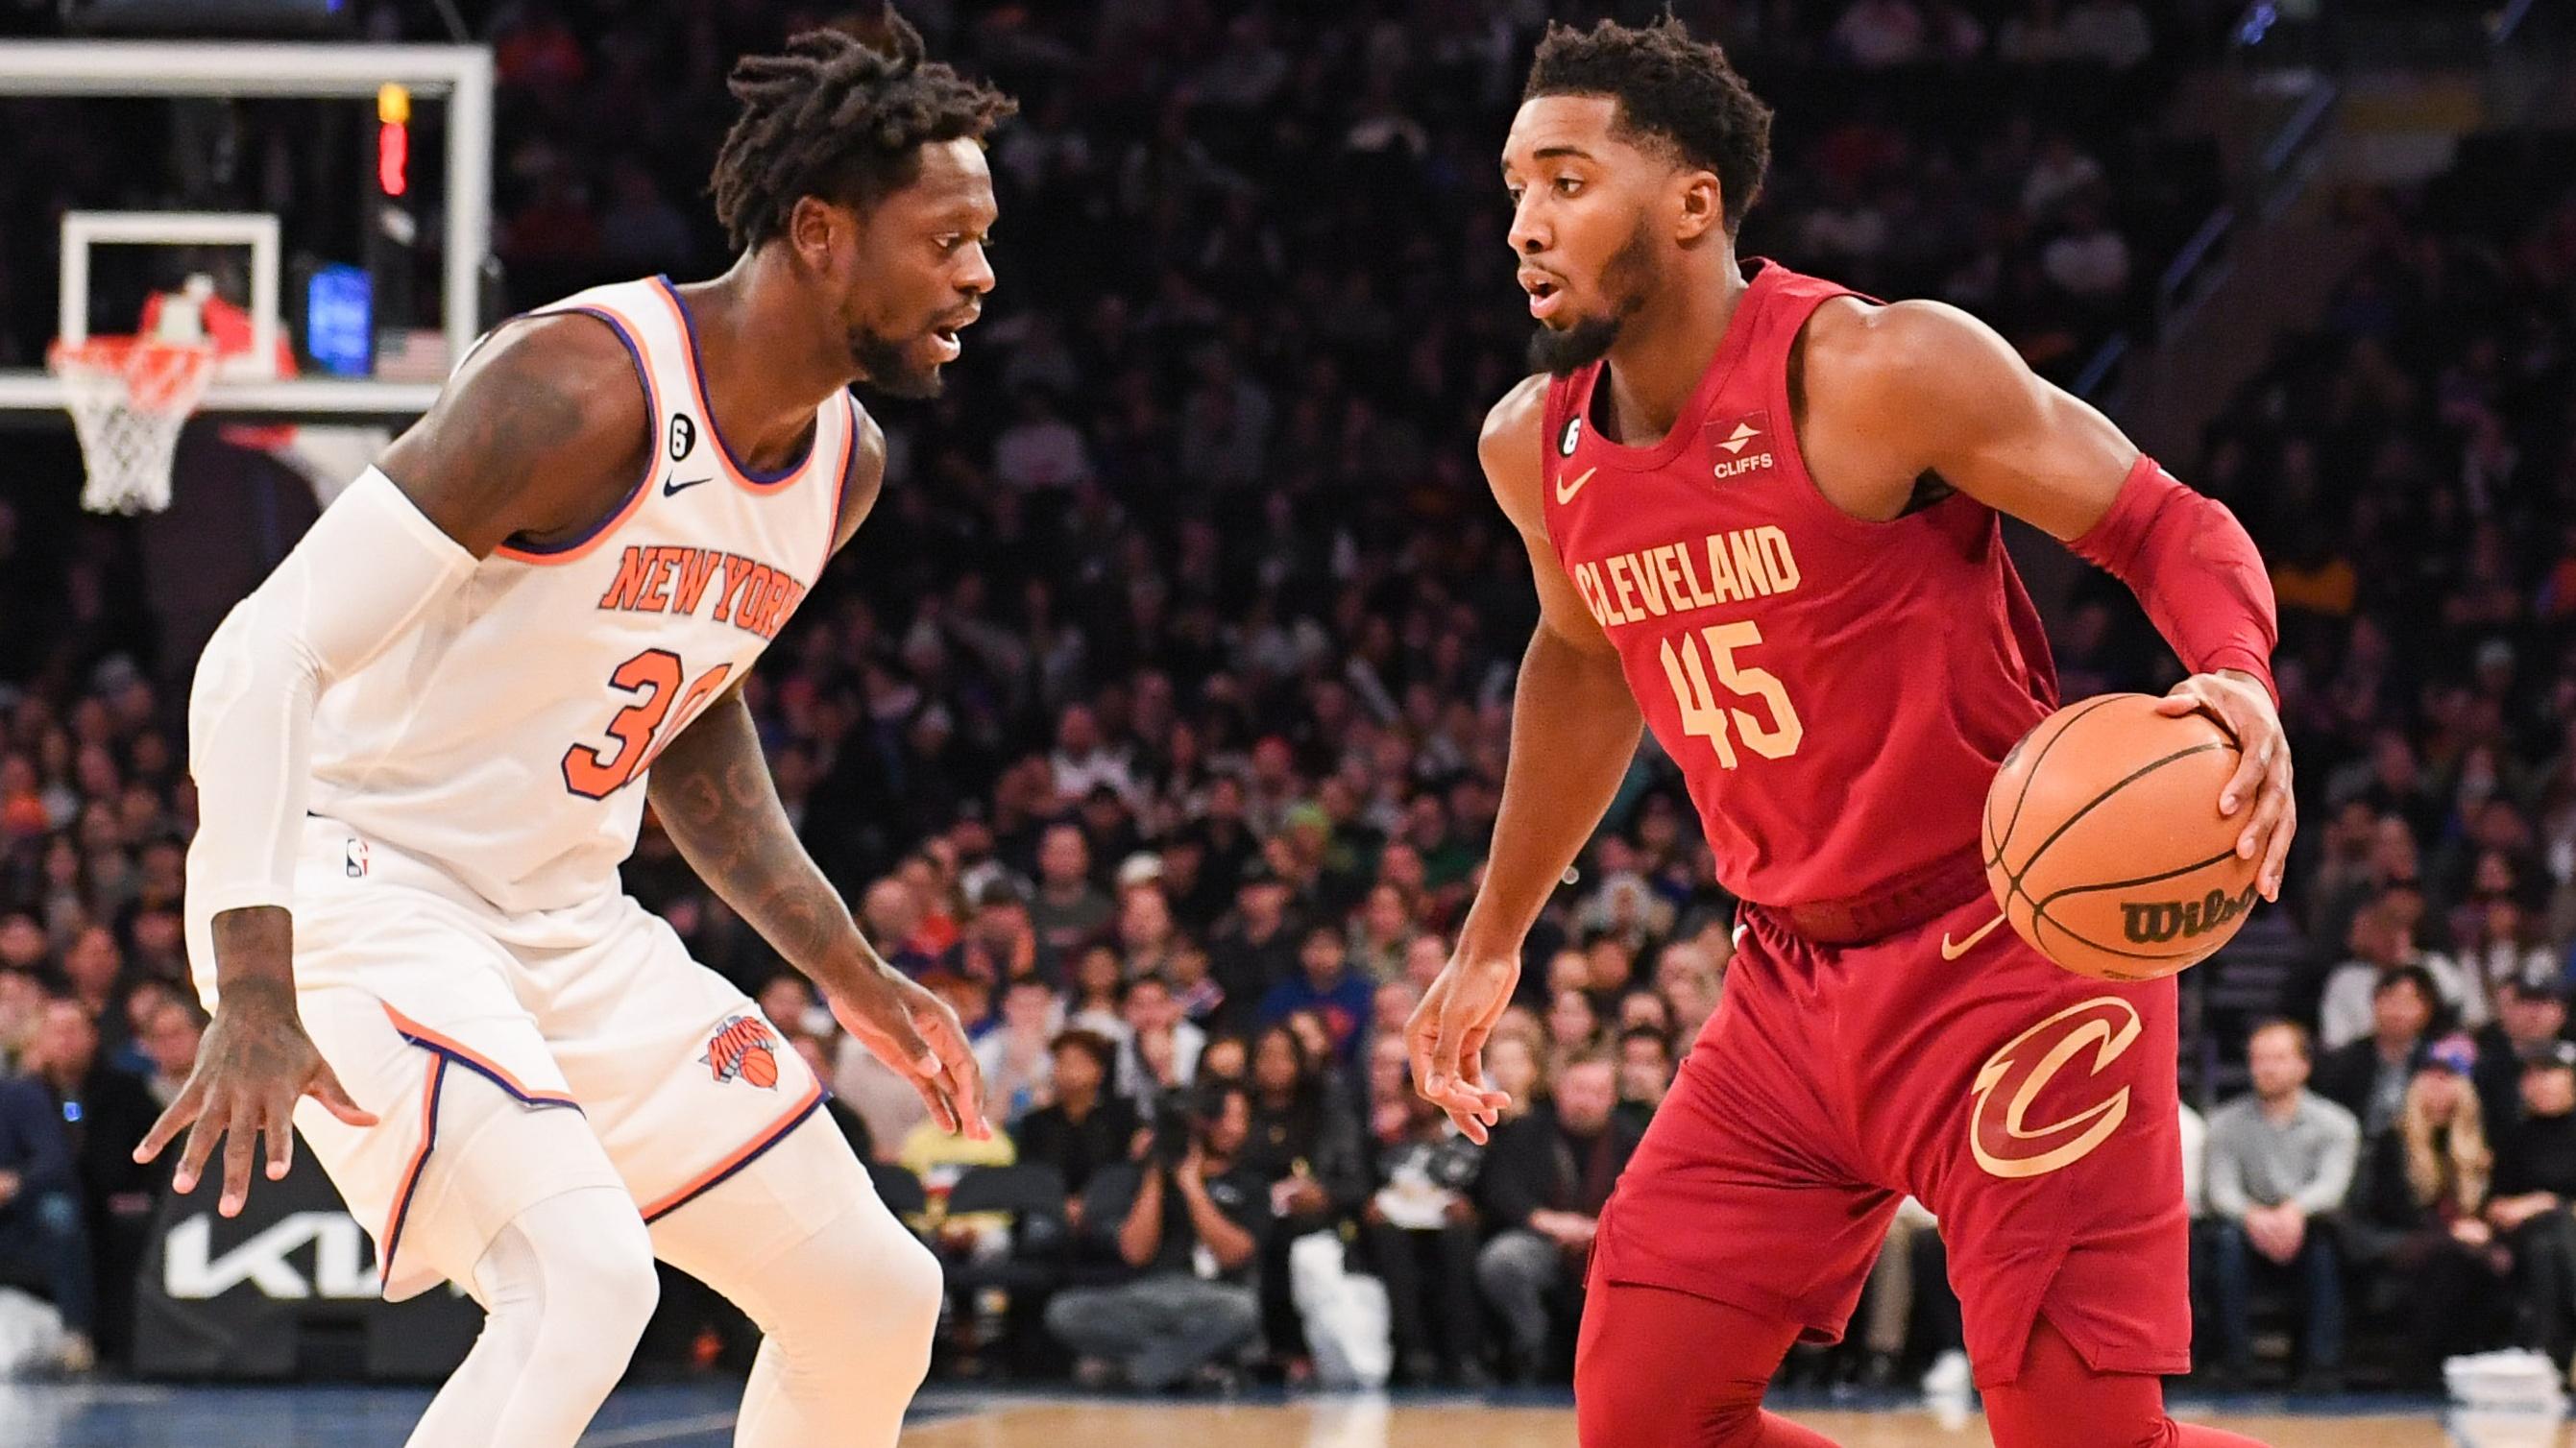 New York Knicks forward Julius Randle (30) guards Cleveland Cavaliers guard Donovan Mitchell (45) during the first quarter at Madison Square Garden / Dennis Schneidler - USA TODAY Sports